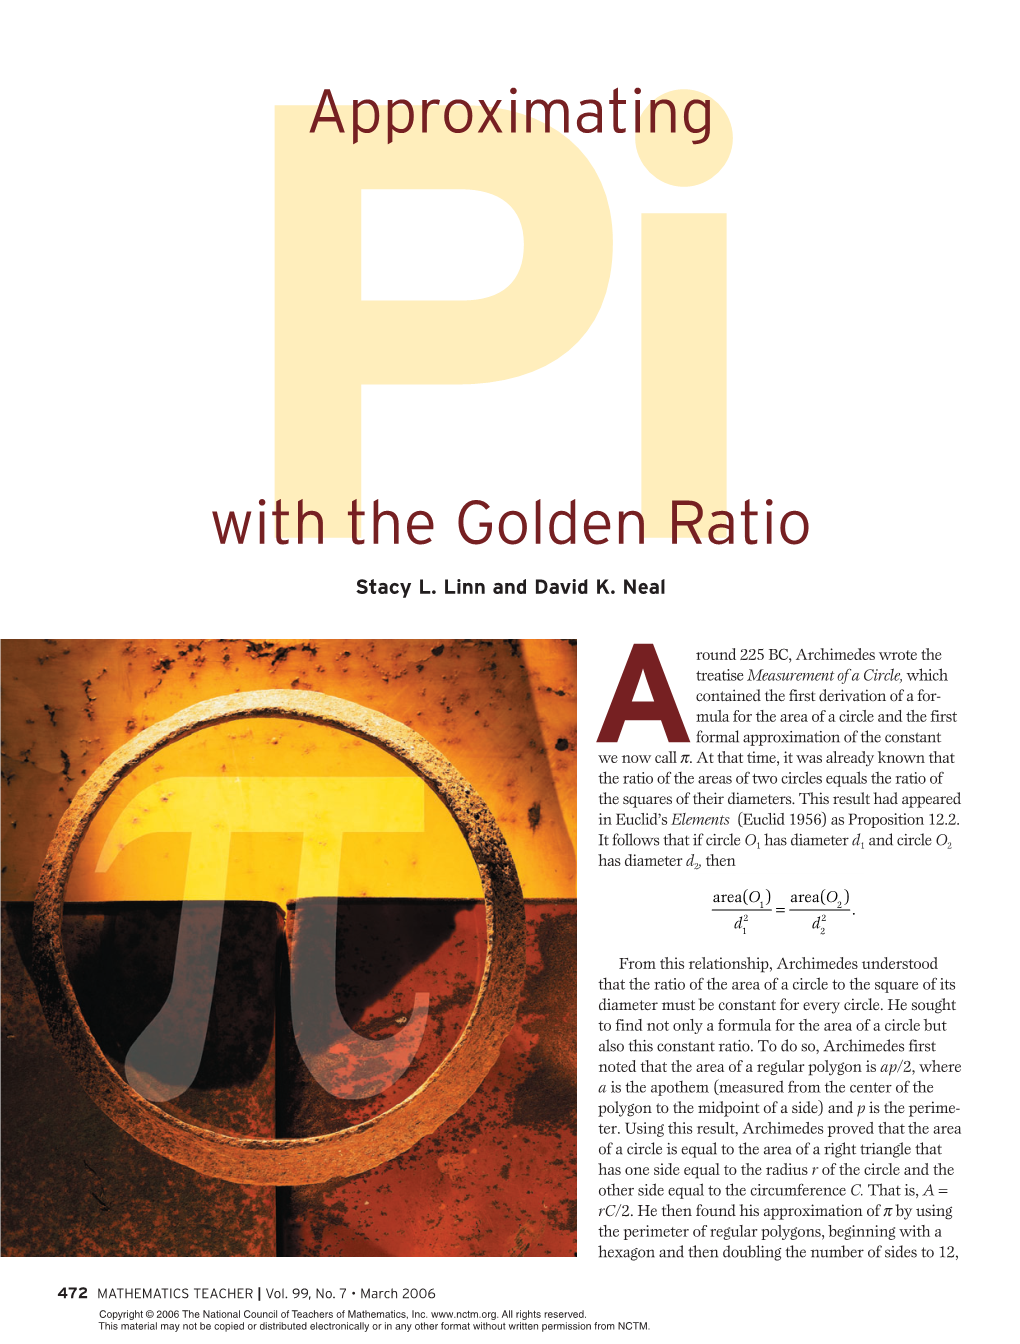 Piwith the Golden Ratio Approximating